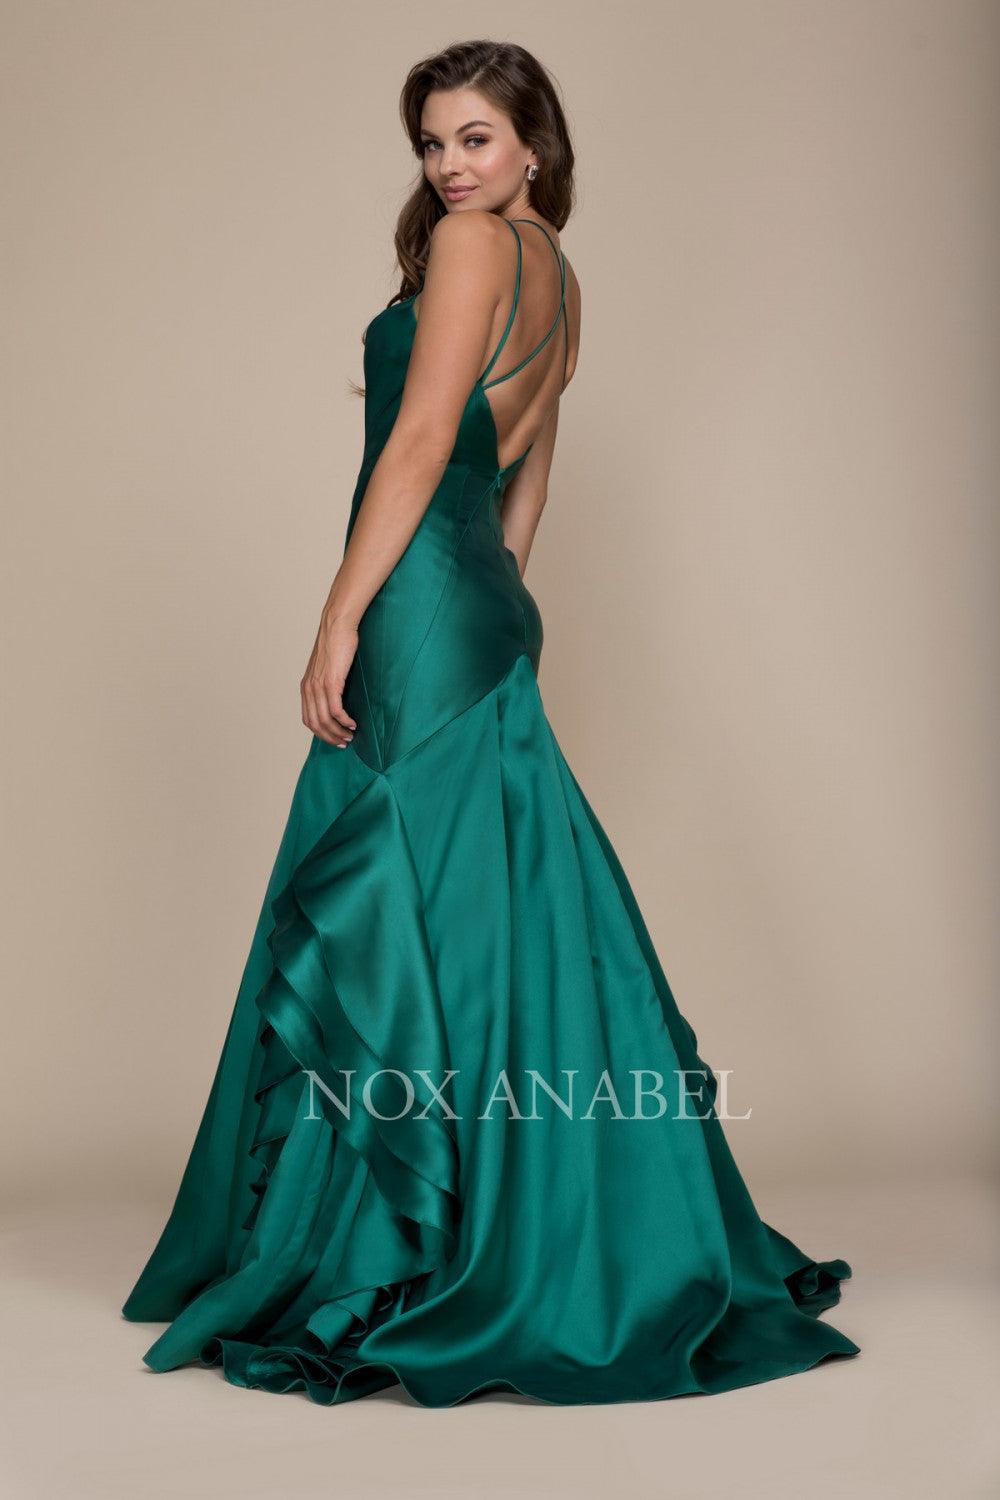 Long Prom Mermaid Ball Gown Formal Dress - The Dress Outlet Nox Anabel